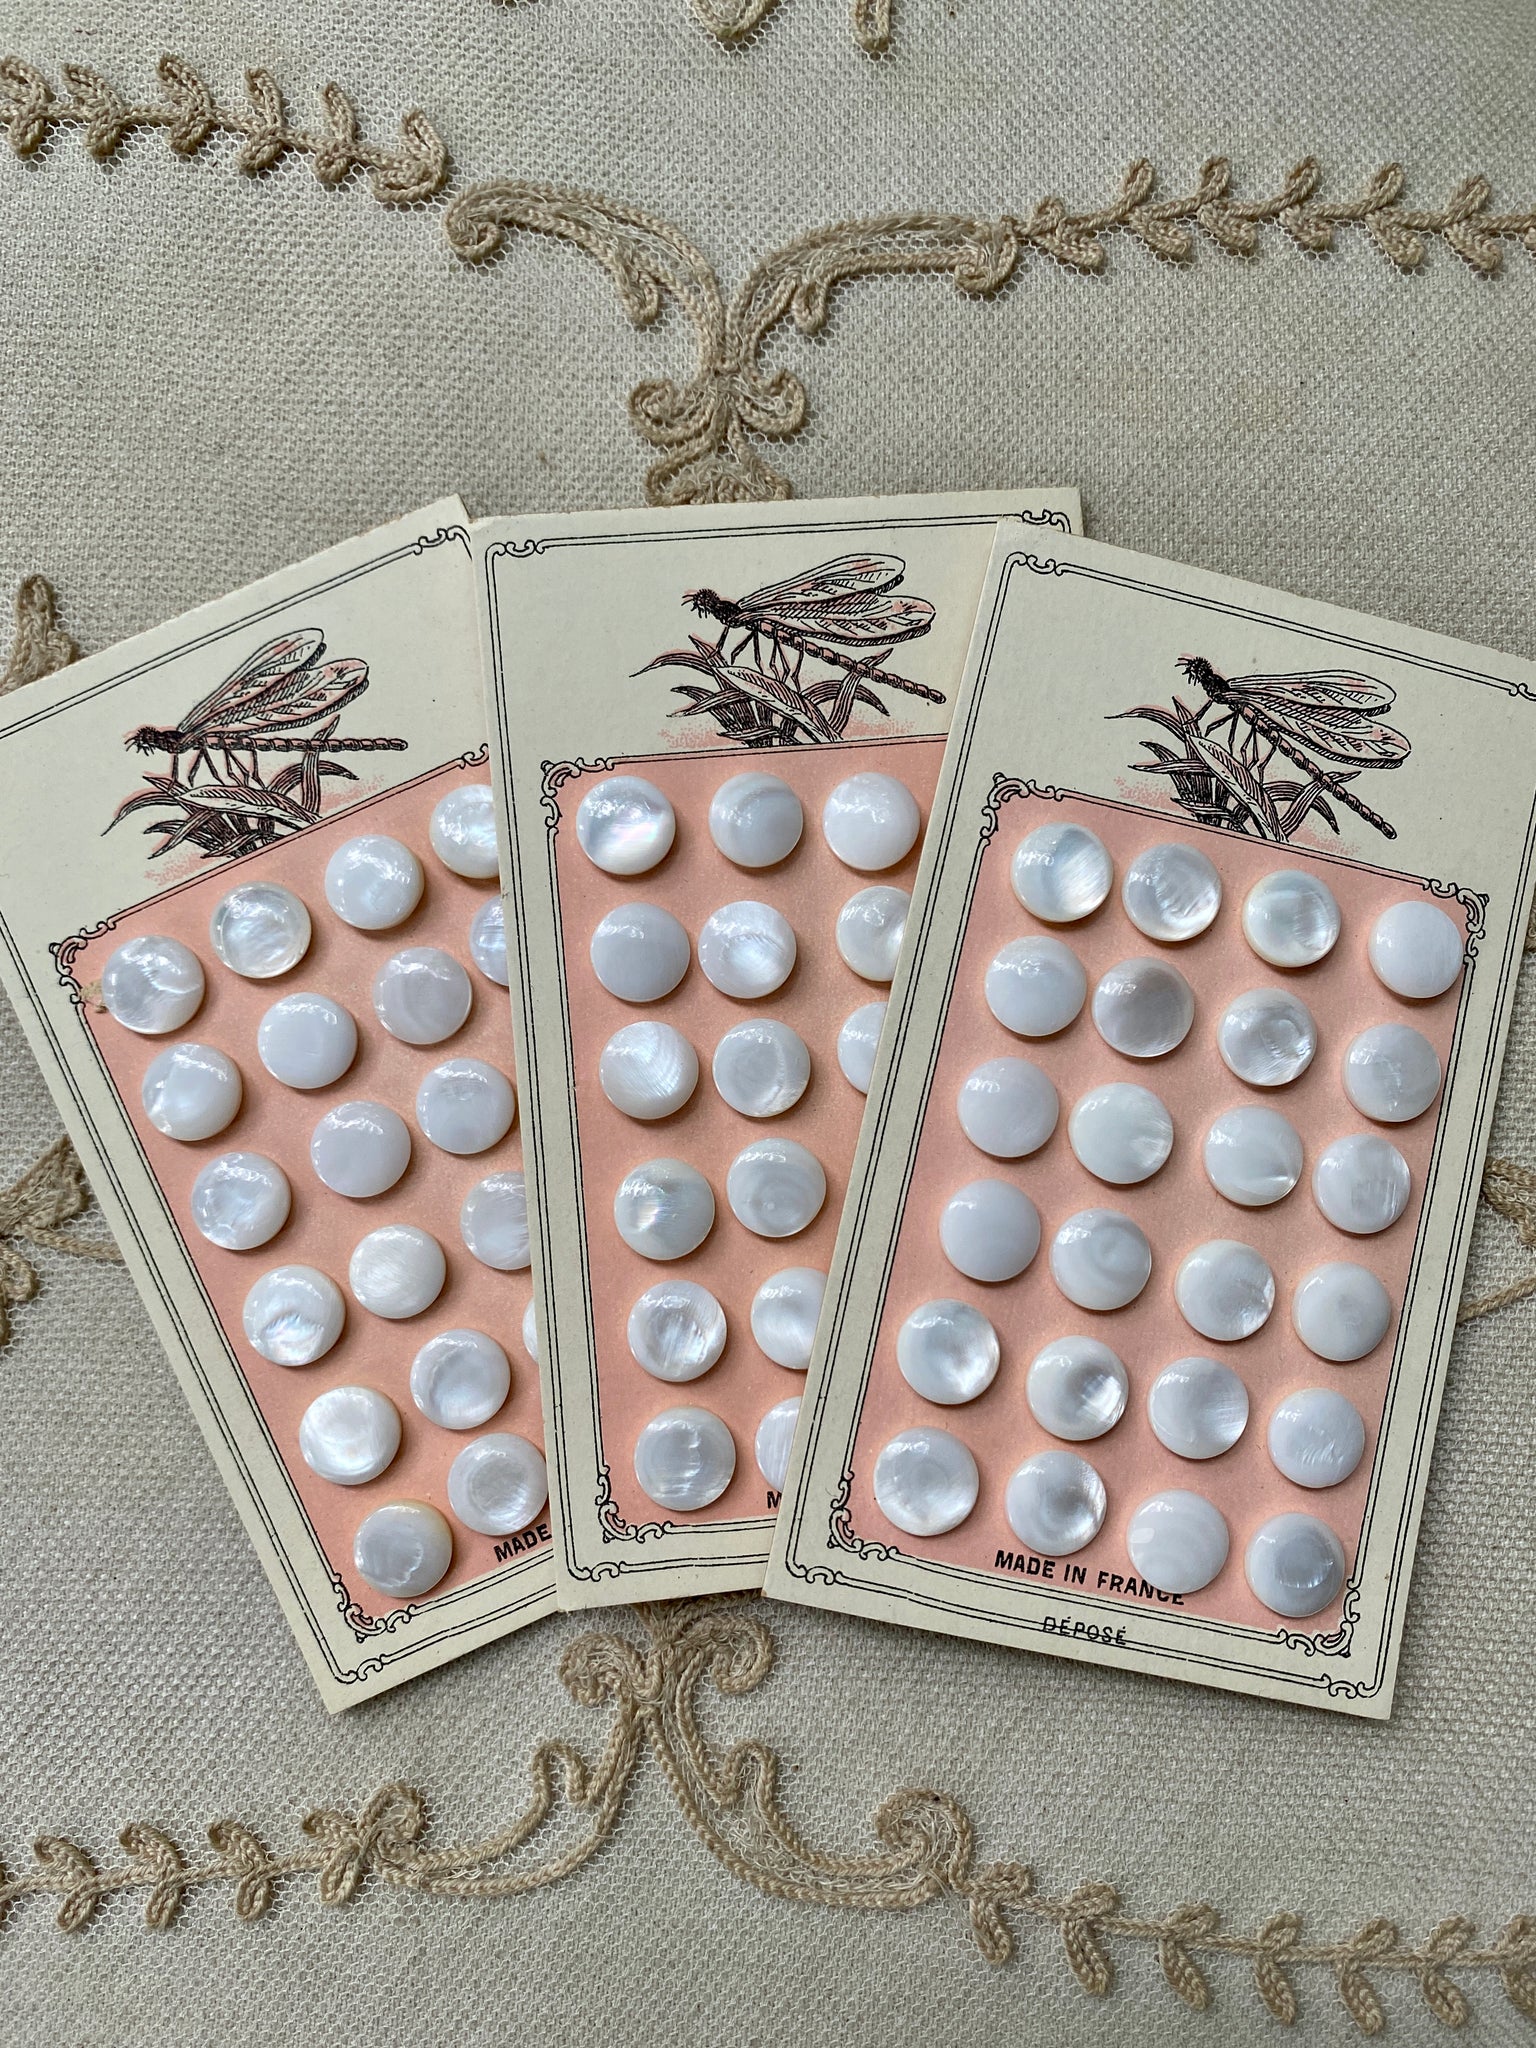 Agnes' Vintage World: Mother of pearl buttons and their cheap